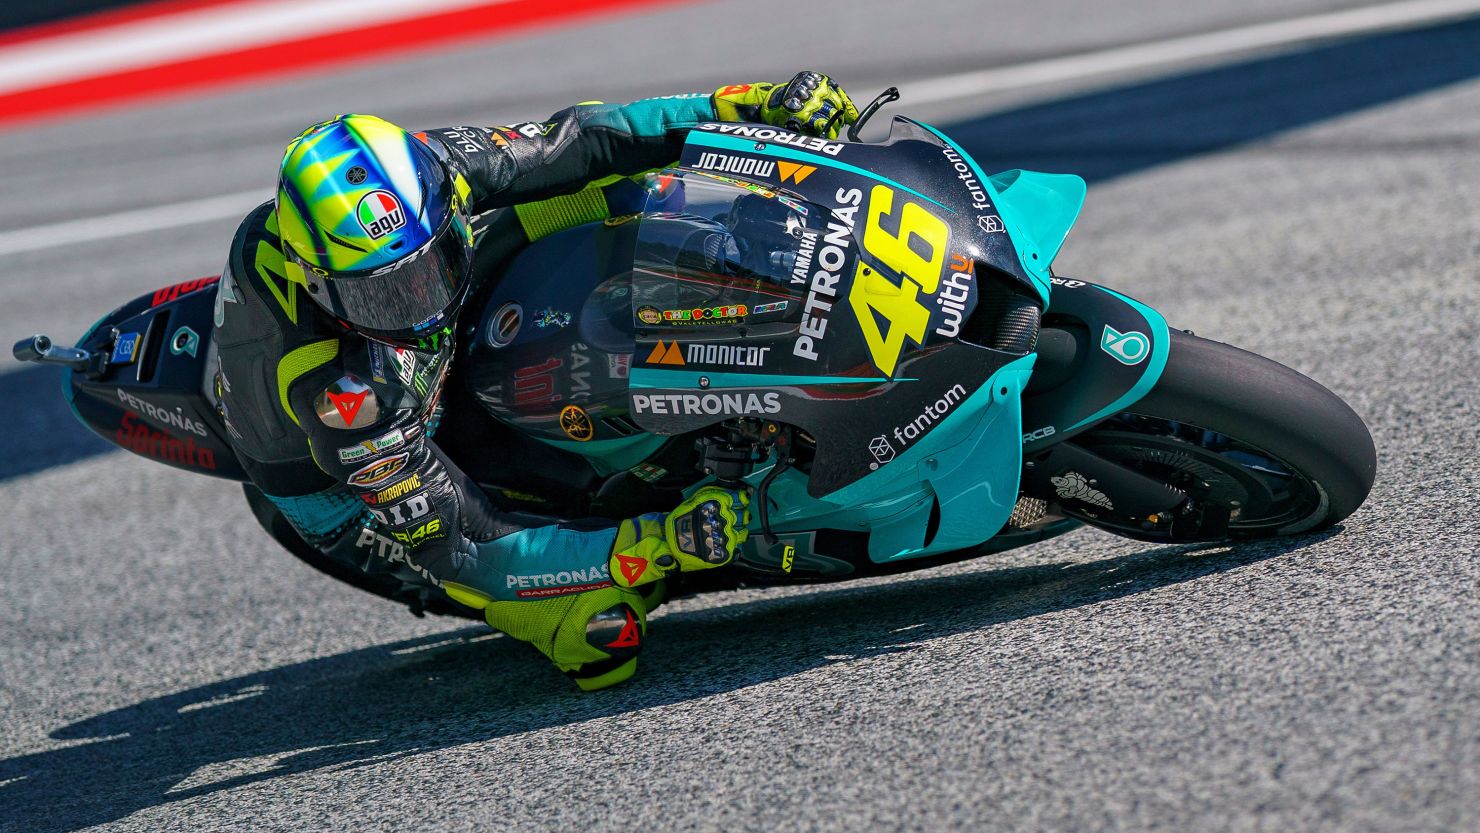 Valentino Rossi calls time on MotoGP, looks to cars